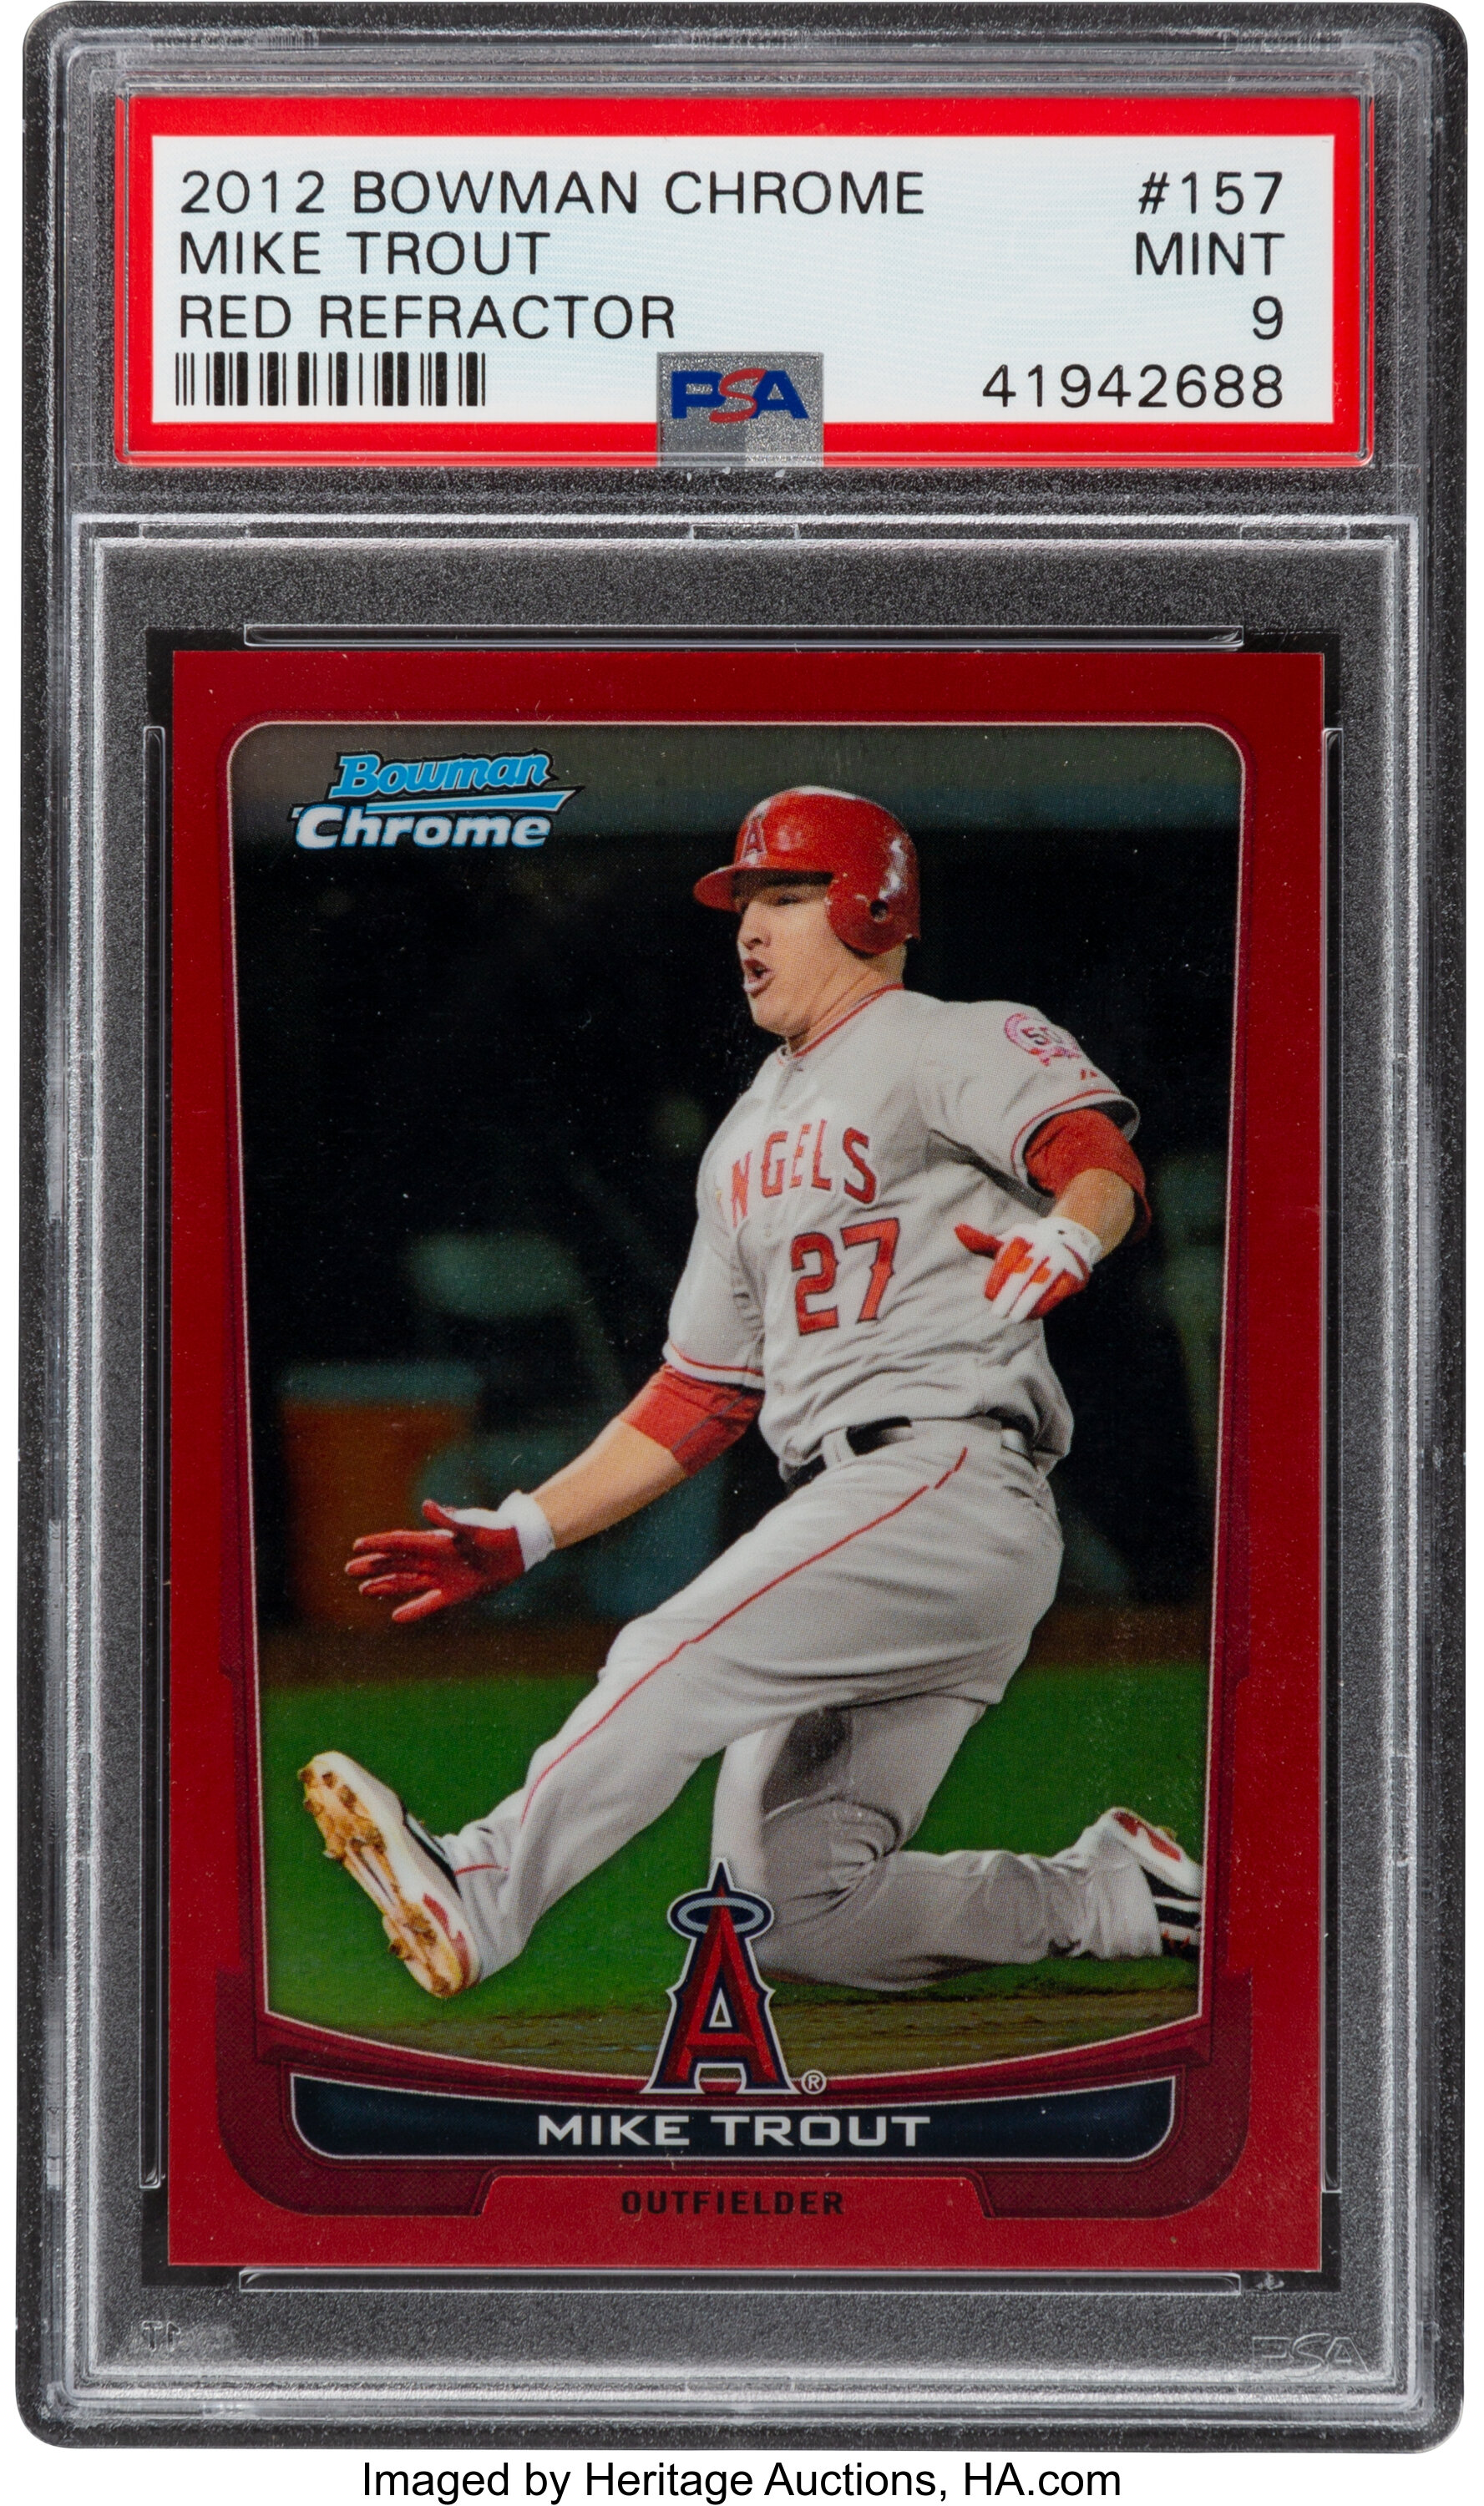 2012 Bowman Chrome Mike Trout Red Refractor #157 PSA Mint 9 -, Lot #57858